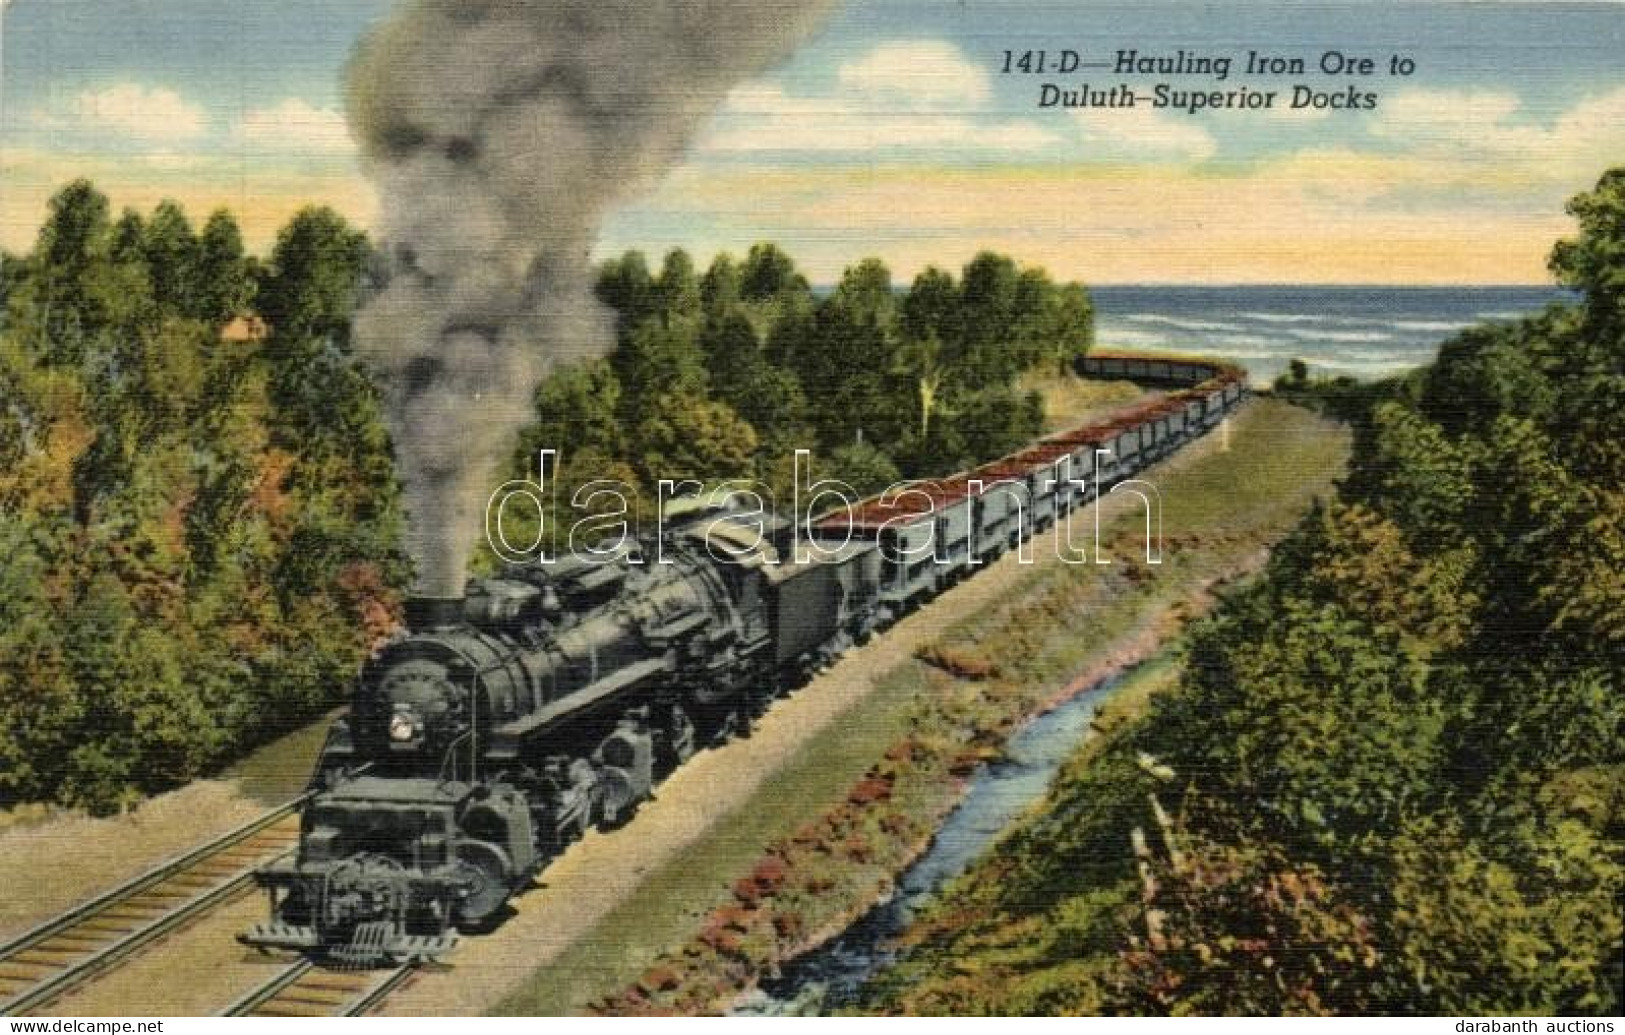 T2 Hauling Iron Ore To Duluth-Superior Docks, Locomotive - Unclassified